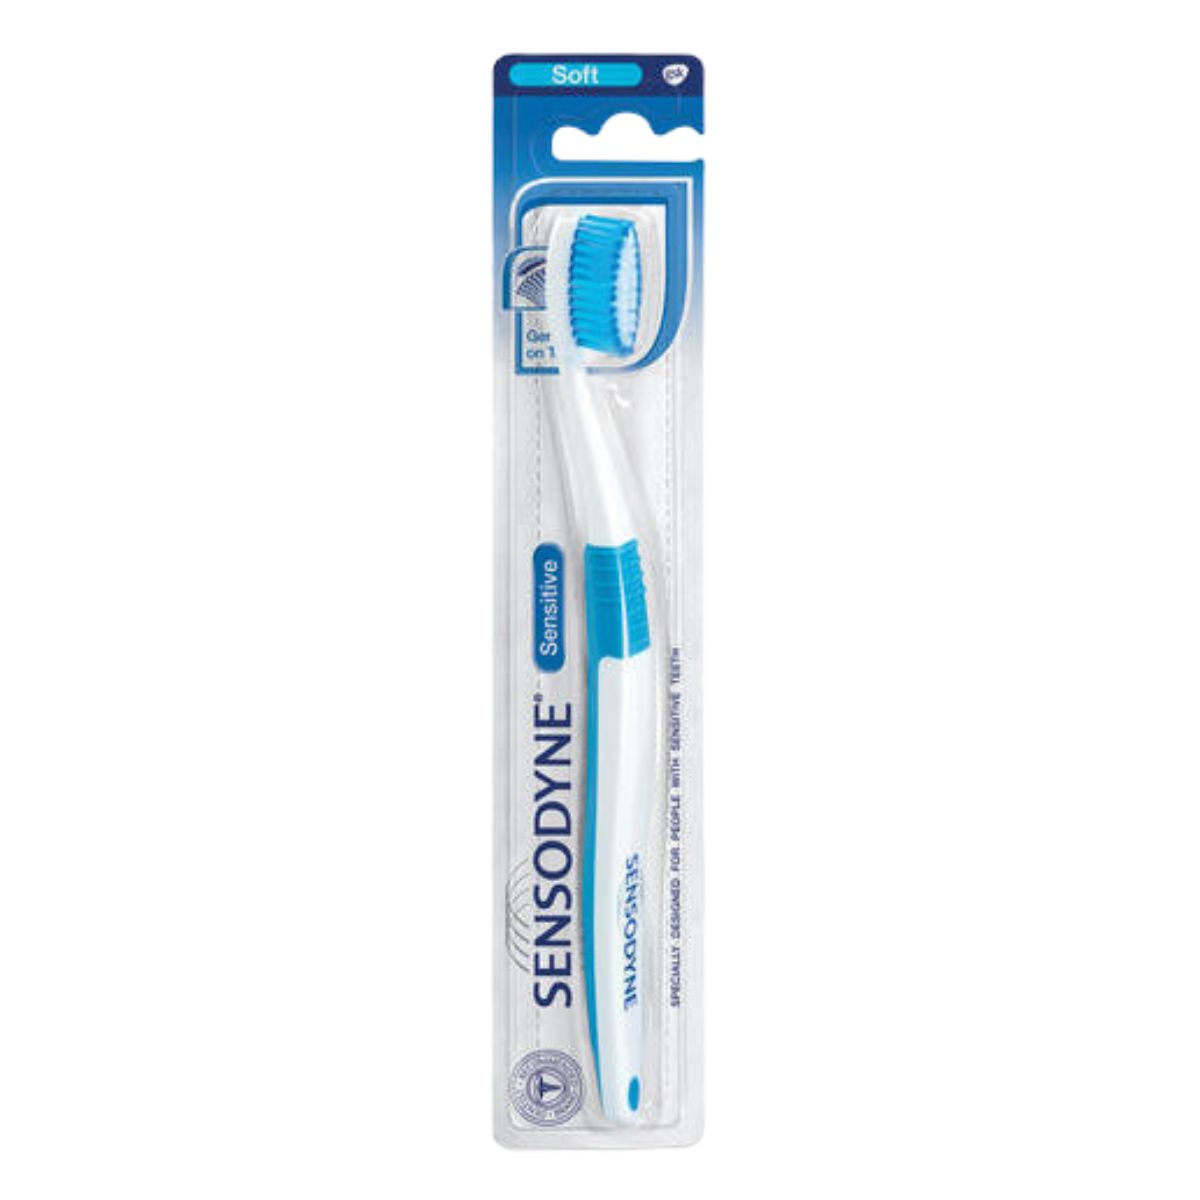 A Sensodyne - Soft Toothbrush - 1pcs in a package.